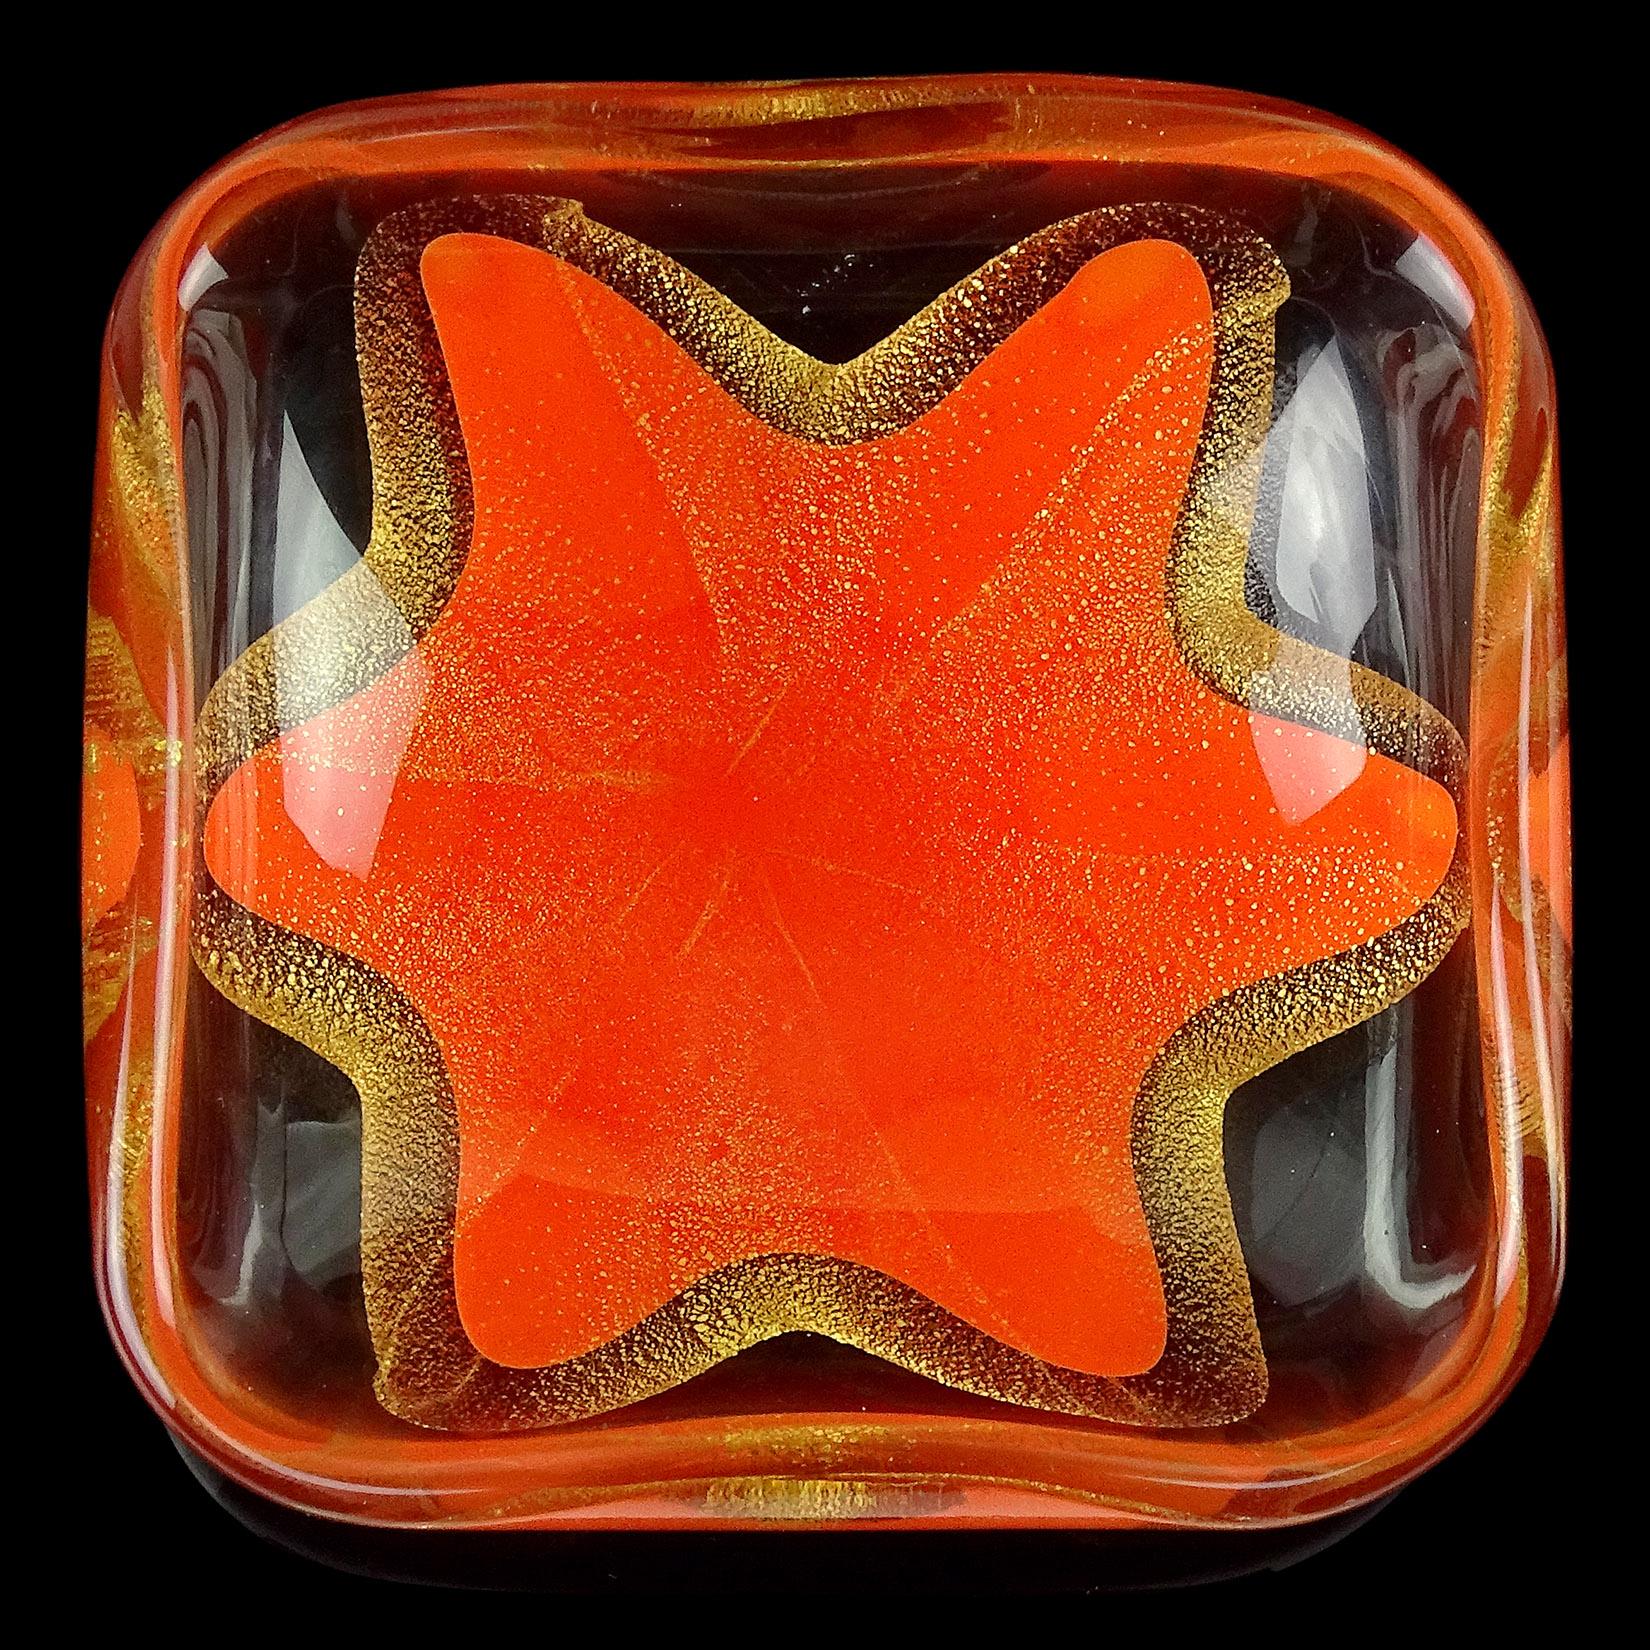 Beautiful set of vintage Murano hand blown orange and gold flecks Italian art glass star design ring or trinket dish set. Documented to the Salviati company, circa 1950s. Although small, they are packed with gold leaf layer surrounding the starfish